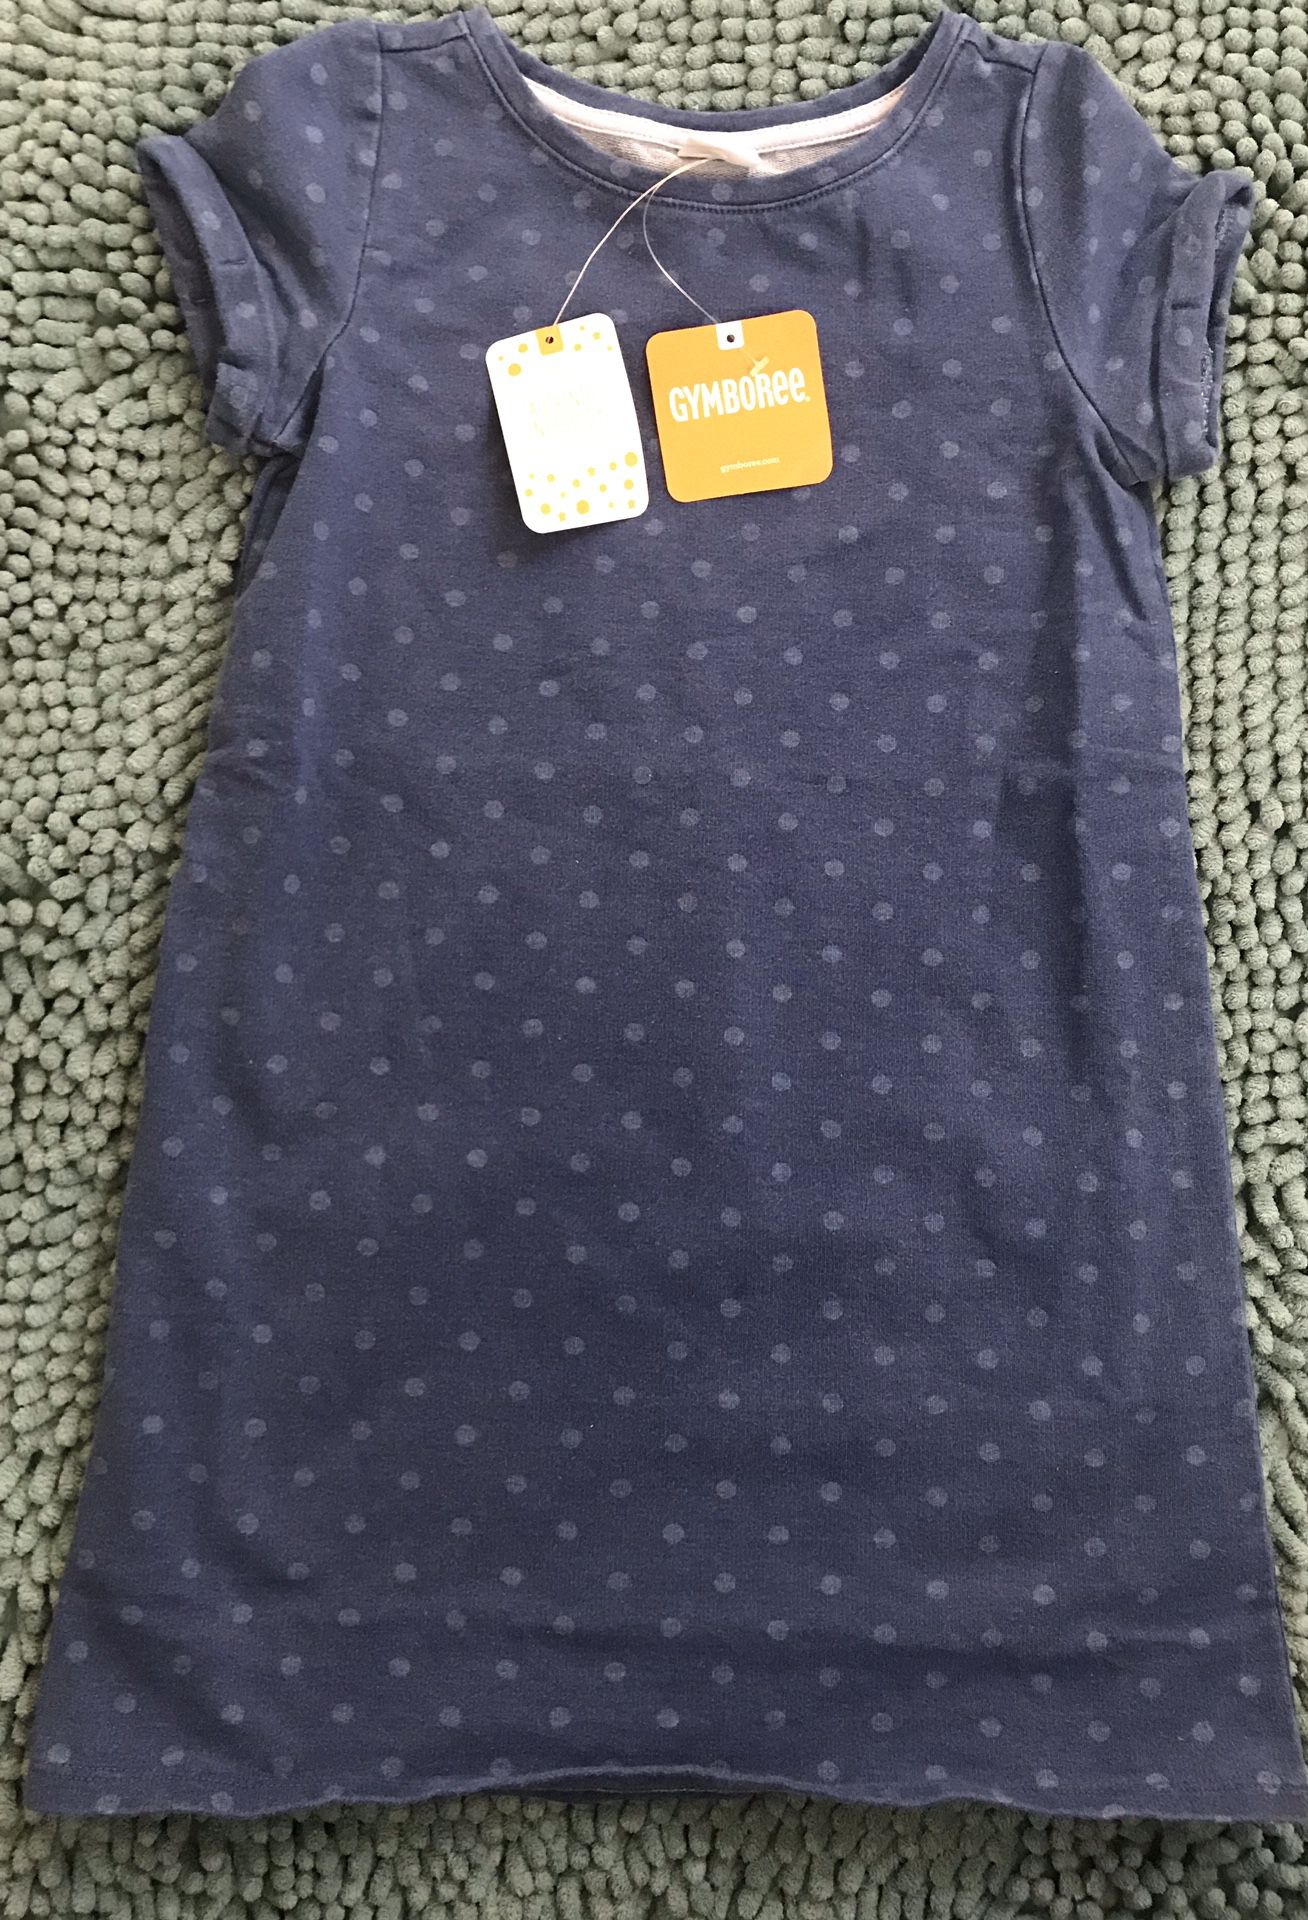 NEW WITH TAGS GYMBOREE NAVY BLUE POLKA DOTTED TODDLER DRESS SIZE 5 T